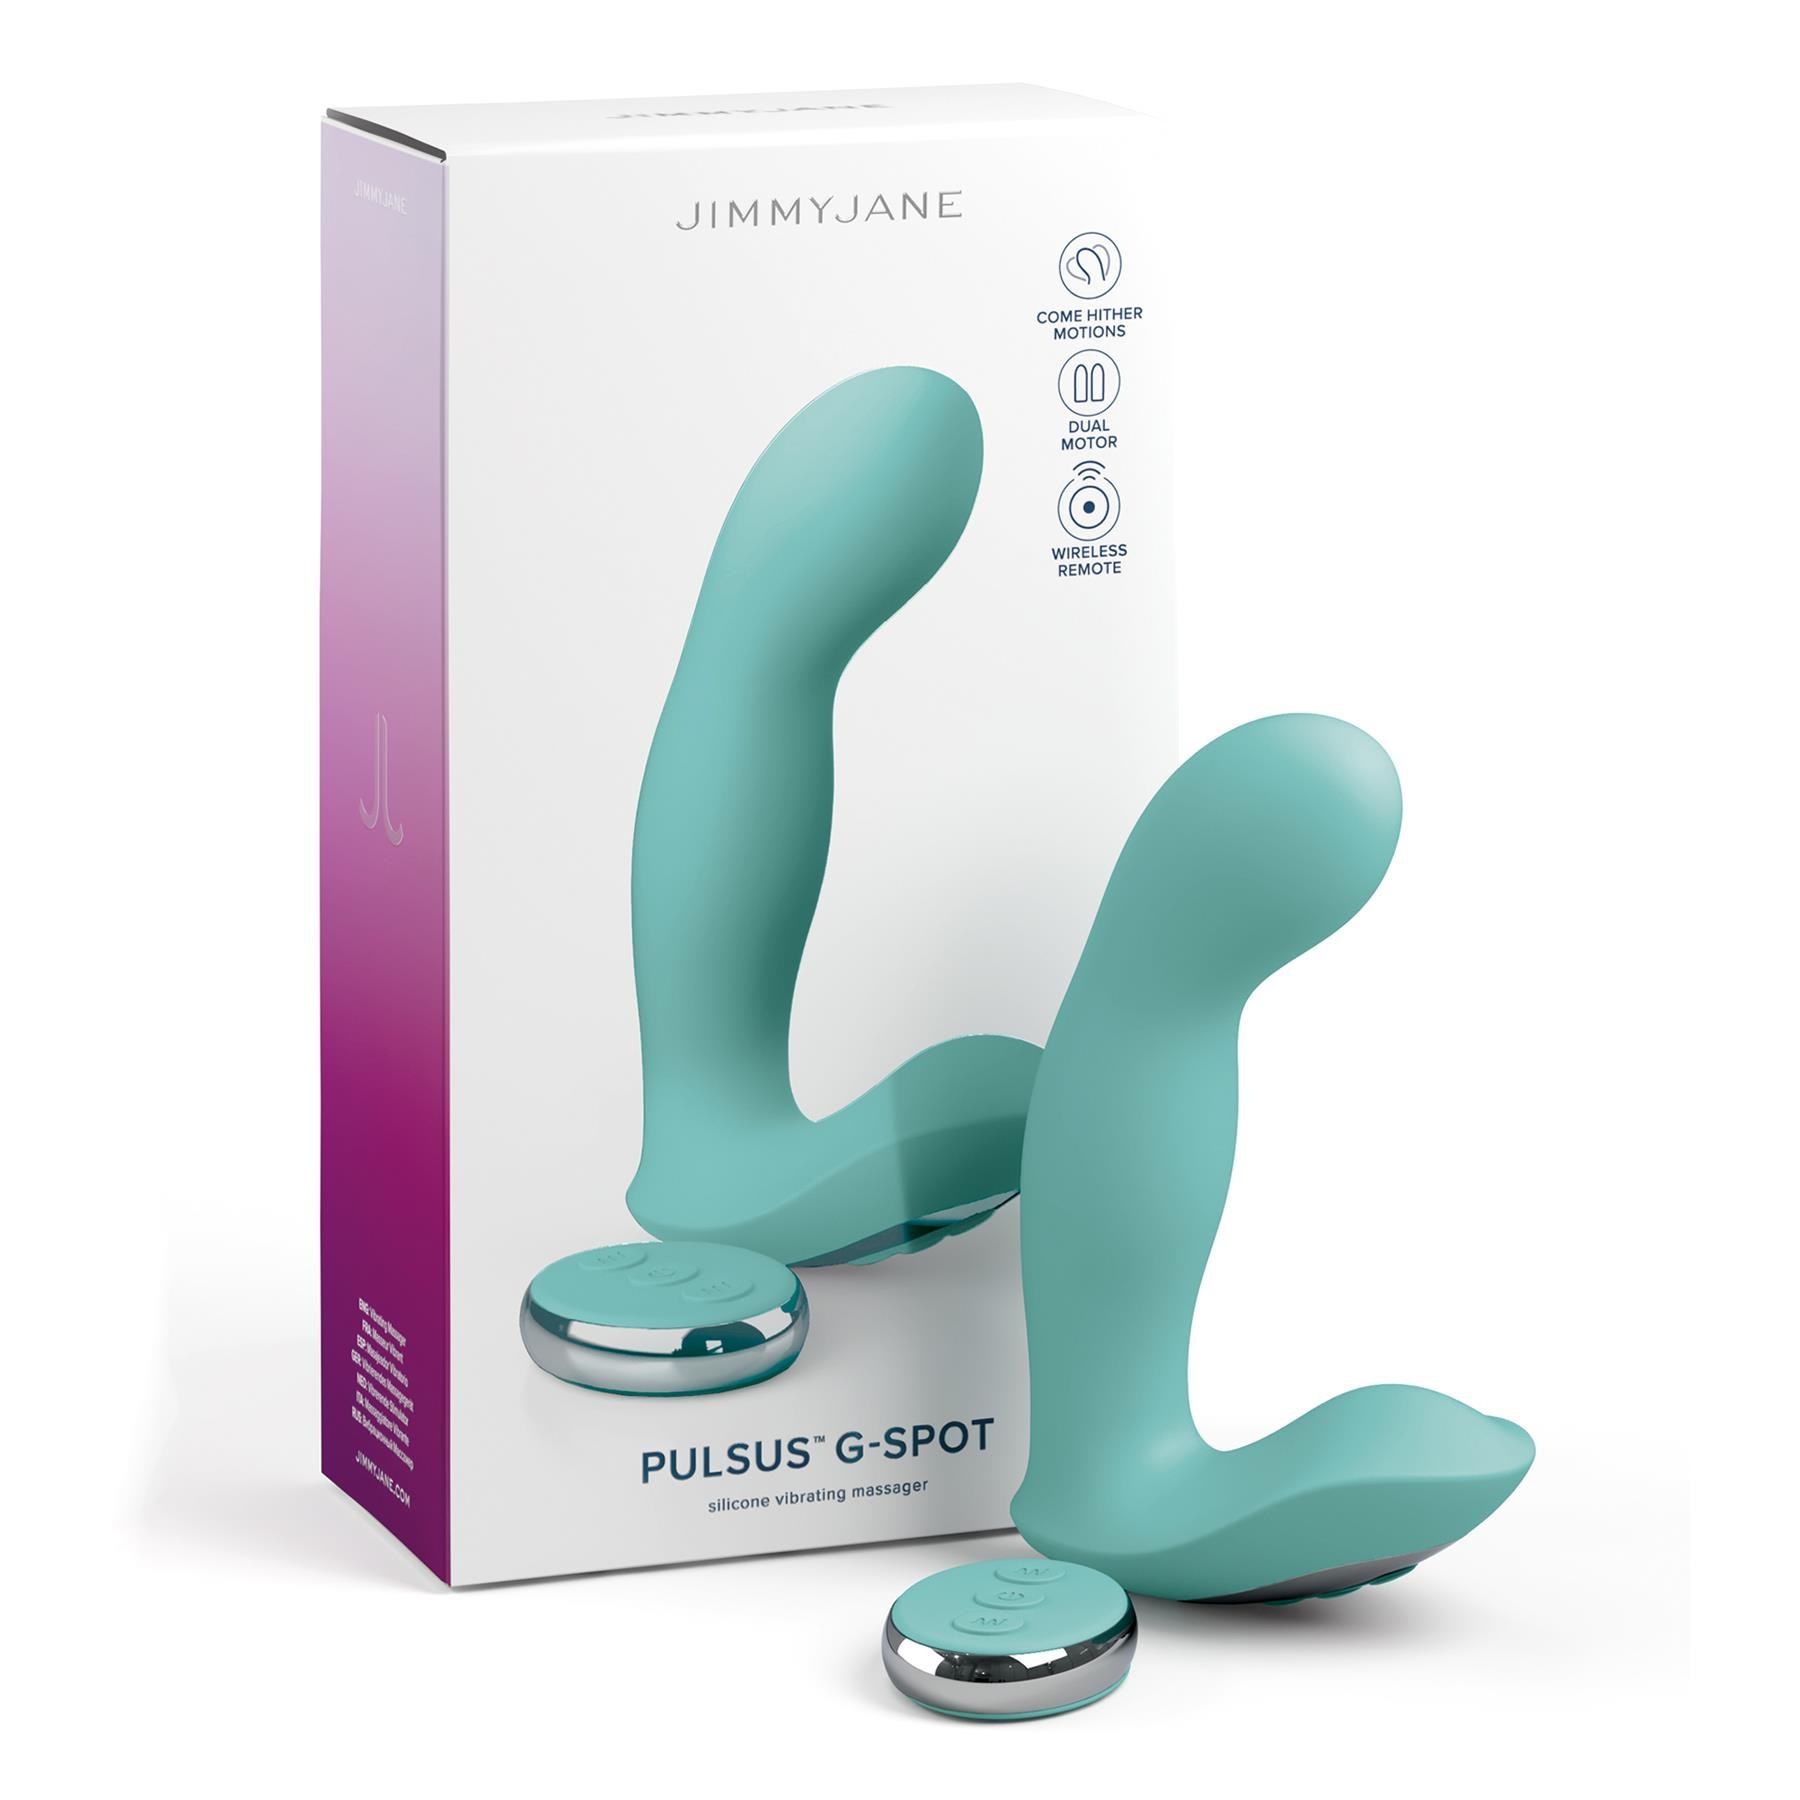 Jimmy Jane Pulsus G-Spot Vibrator With Remote Control - Product and Packaging